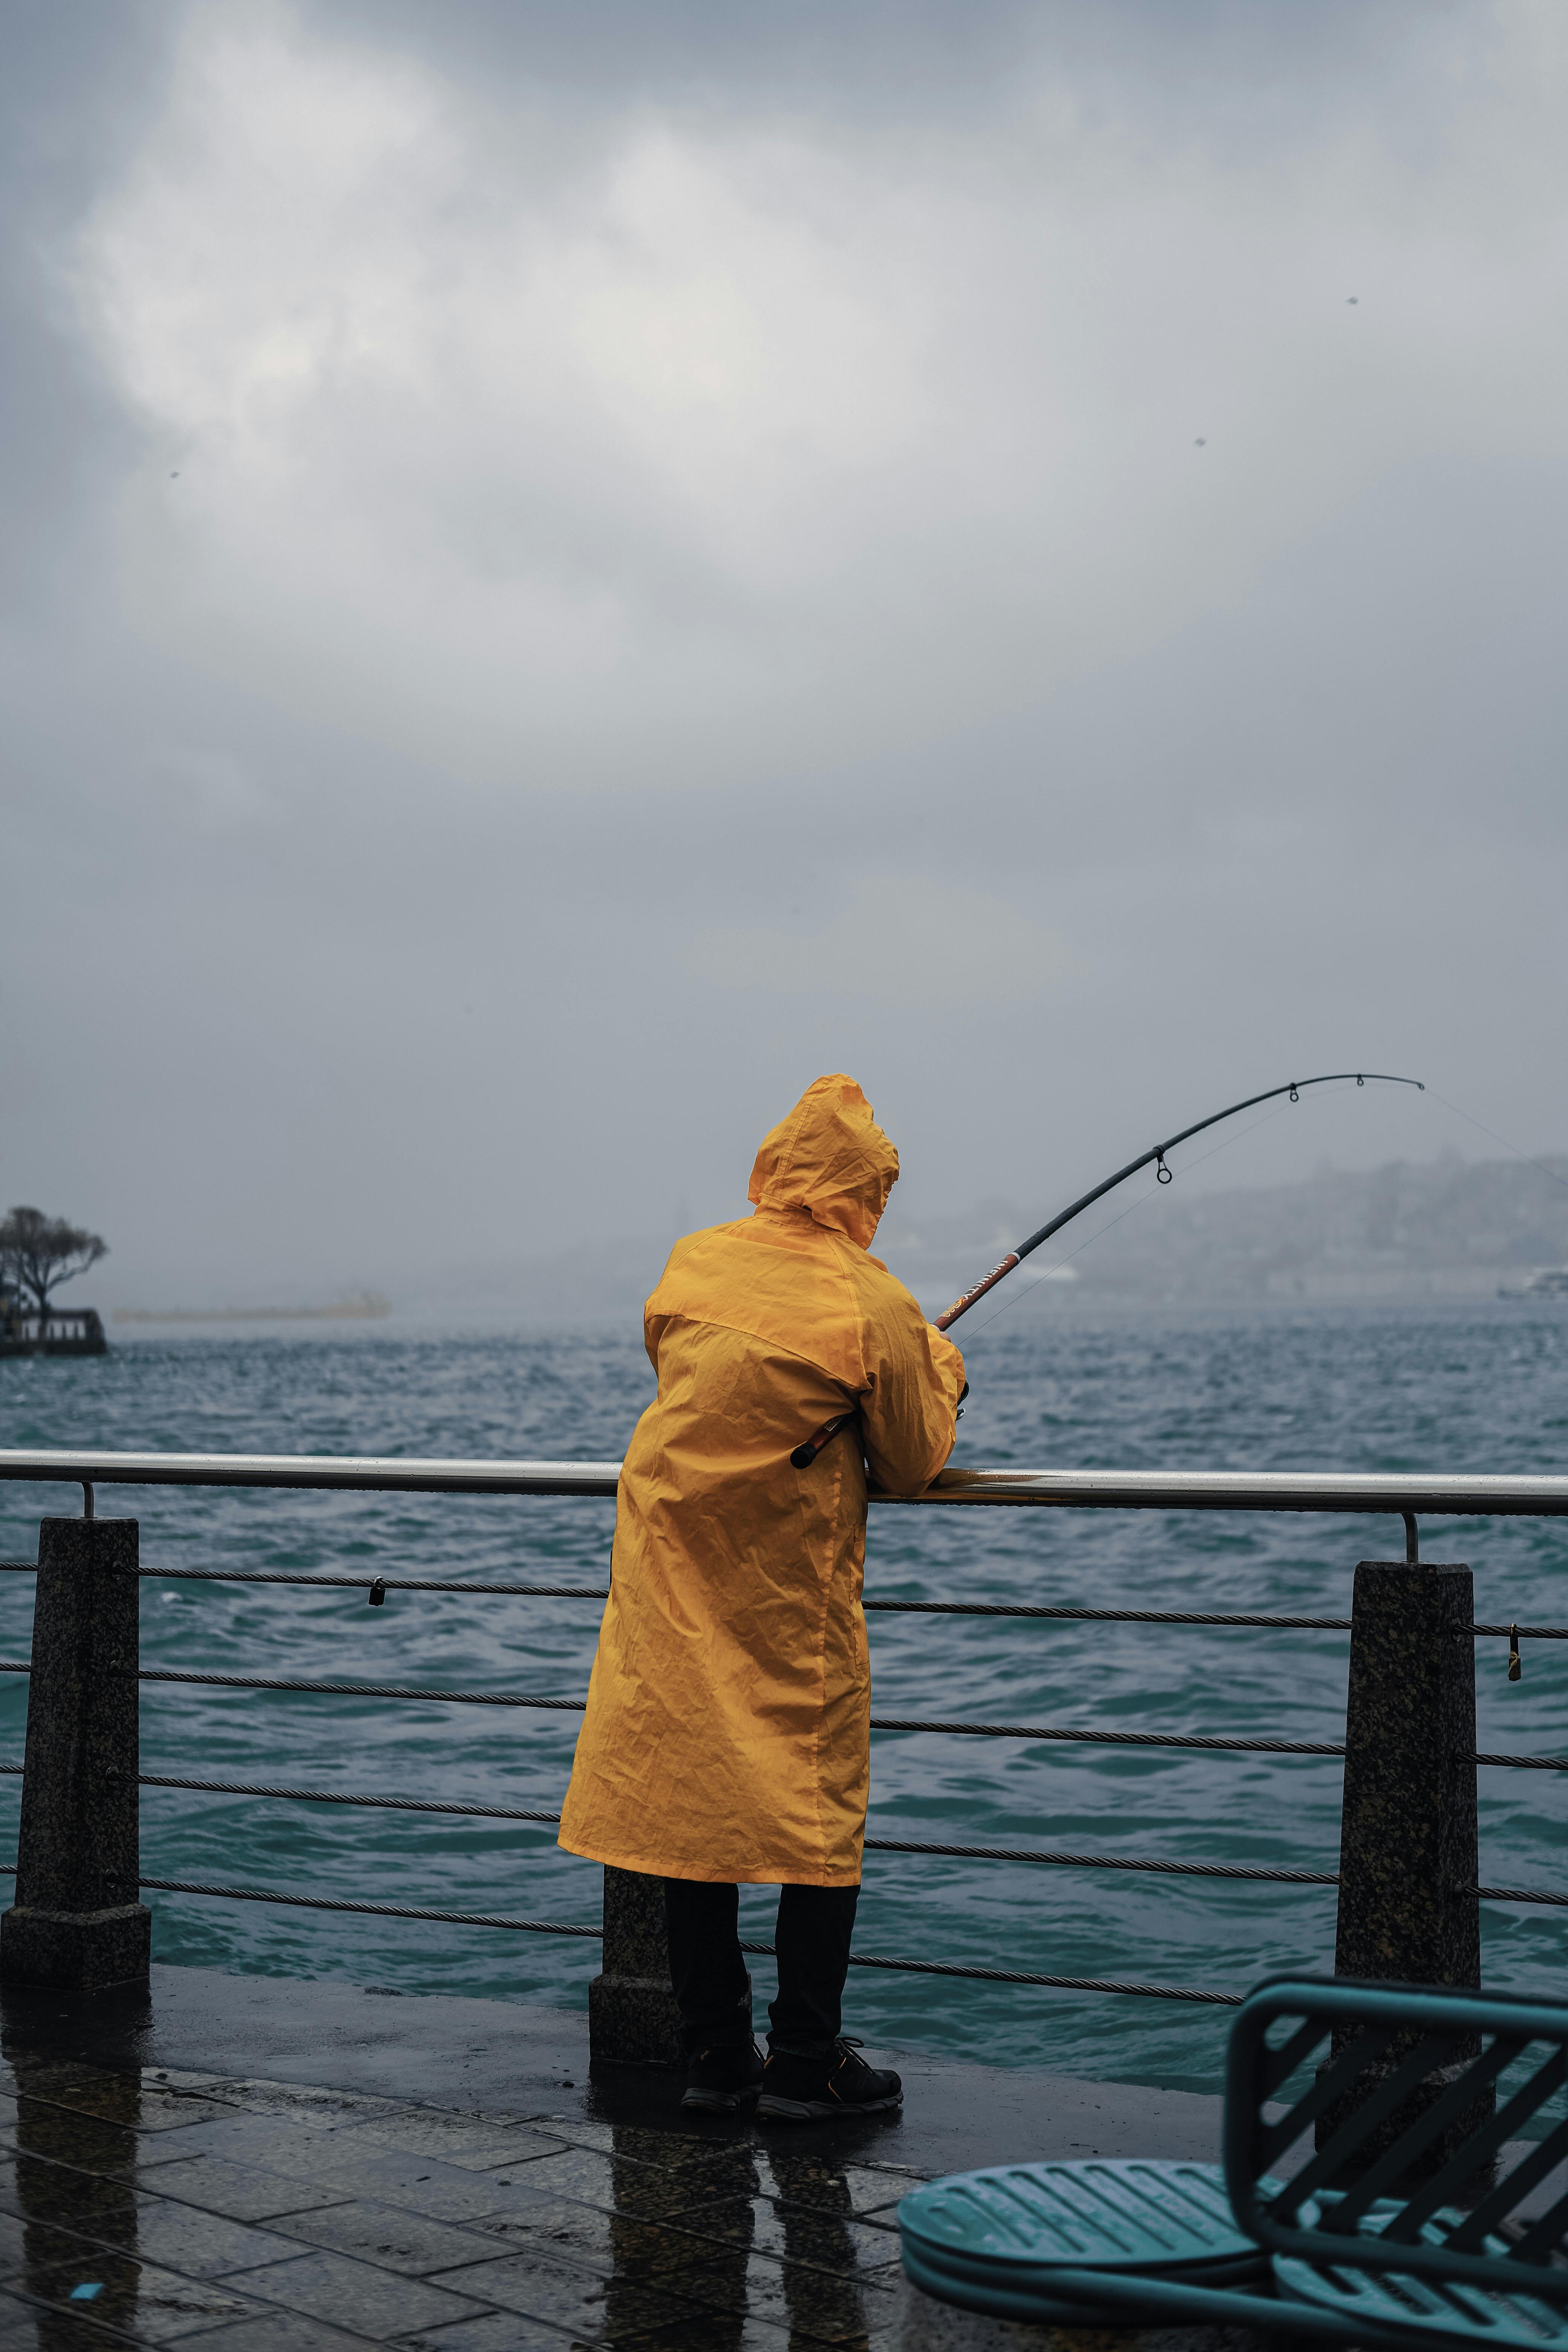 Boy Feeling Surprised. Boy Wearing Yellow Raincoat Feeling Surprised While  Seeing Fish In The Fishing Net Stock Photo, Picture and Royalty Free Image.  Image 128998560.